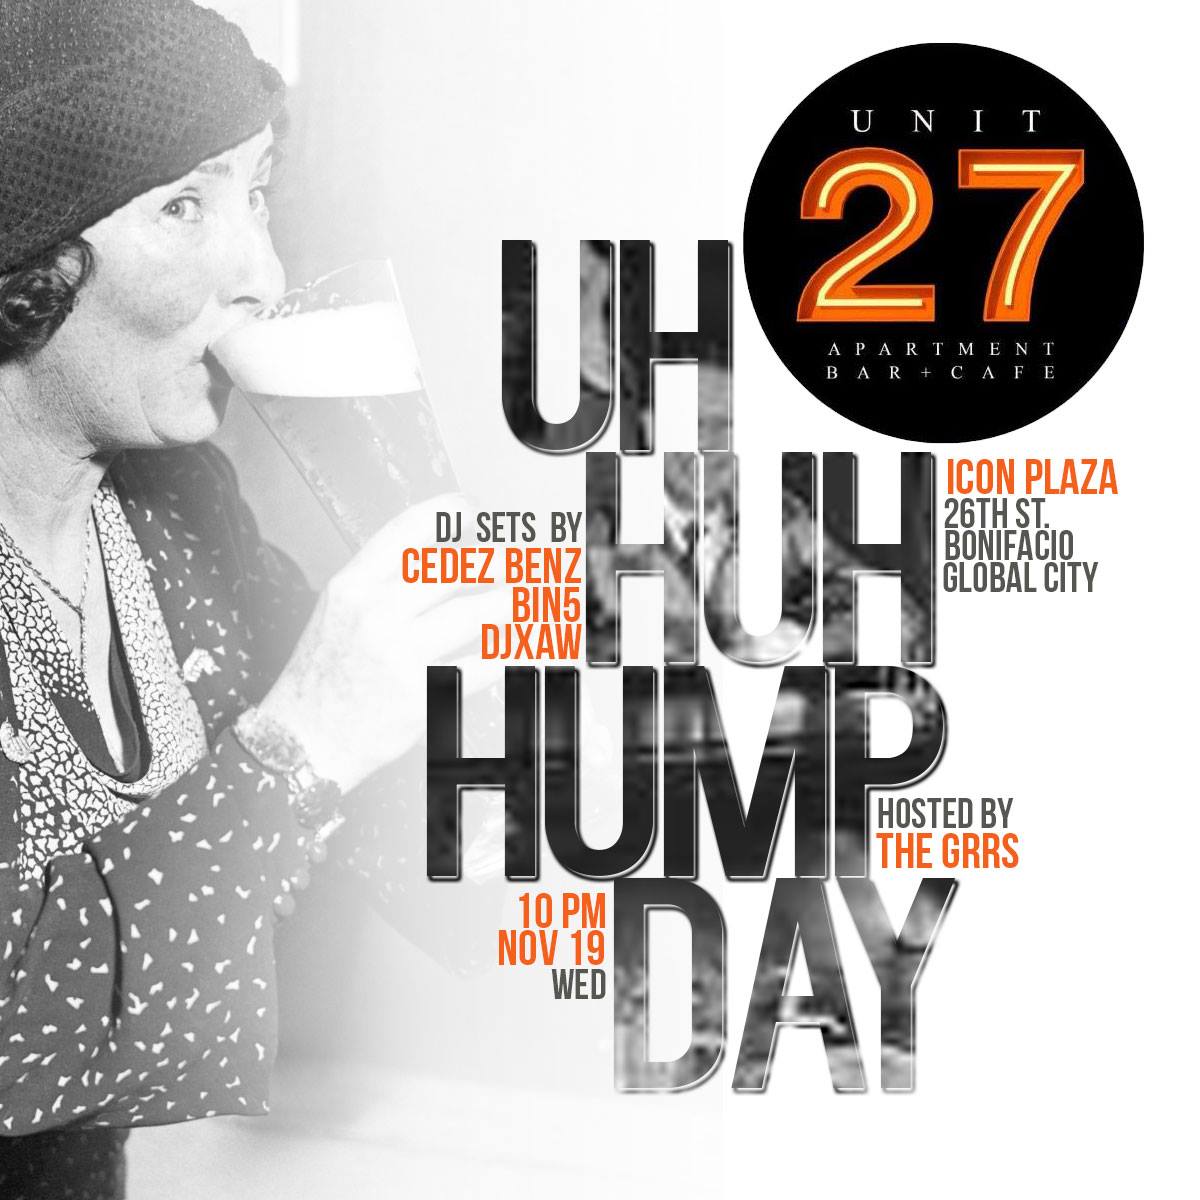 UH HUH HUMP DAY Cesar Camillo invited you clock Wednesday, November 18 at 10:00pm Starts in about 19 hours · 81°F Partly Cloudy pin Show Map Unit 27 Bar+Cafe Icon Plaza 26th Street, Fort Bonifacio, Bonifacio Global City envelope Invited by Cesar Camillo Don't let the stress get to you. We got no work the next day. Roll in for the first UH HUH HUMP DAY at #yoursecondhome. We've got DJ sets by CEDEZ BENZ, BIN5 and DJxAW to cure that midweek blow. That's right, #wegotyouhomie. #The Grrs